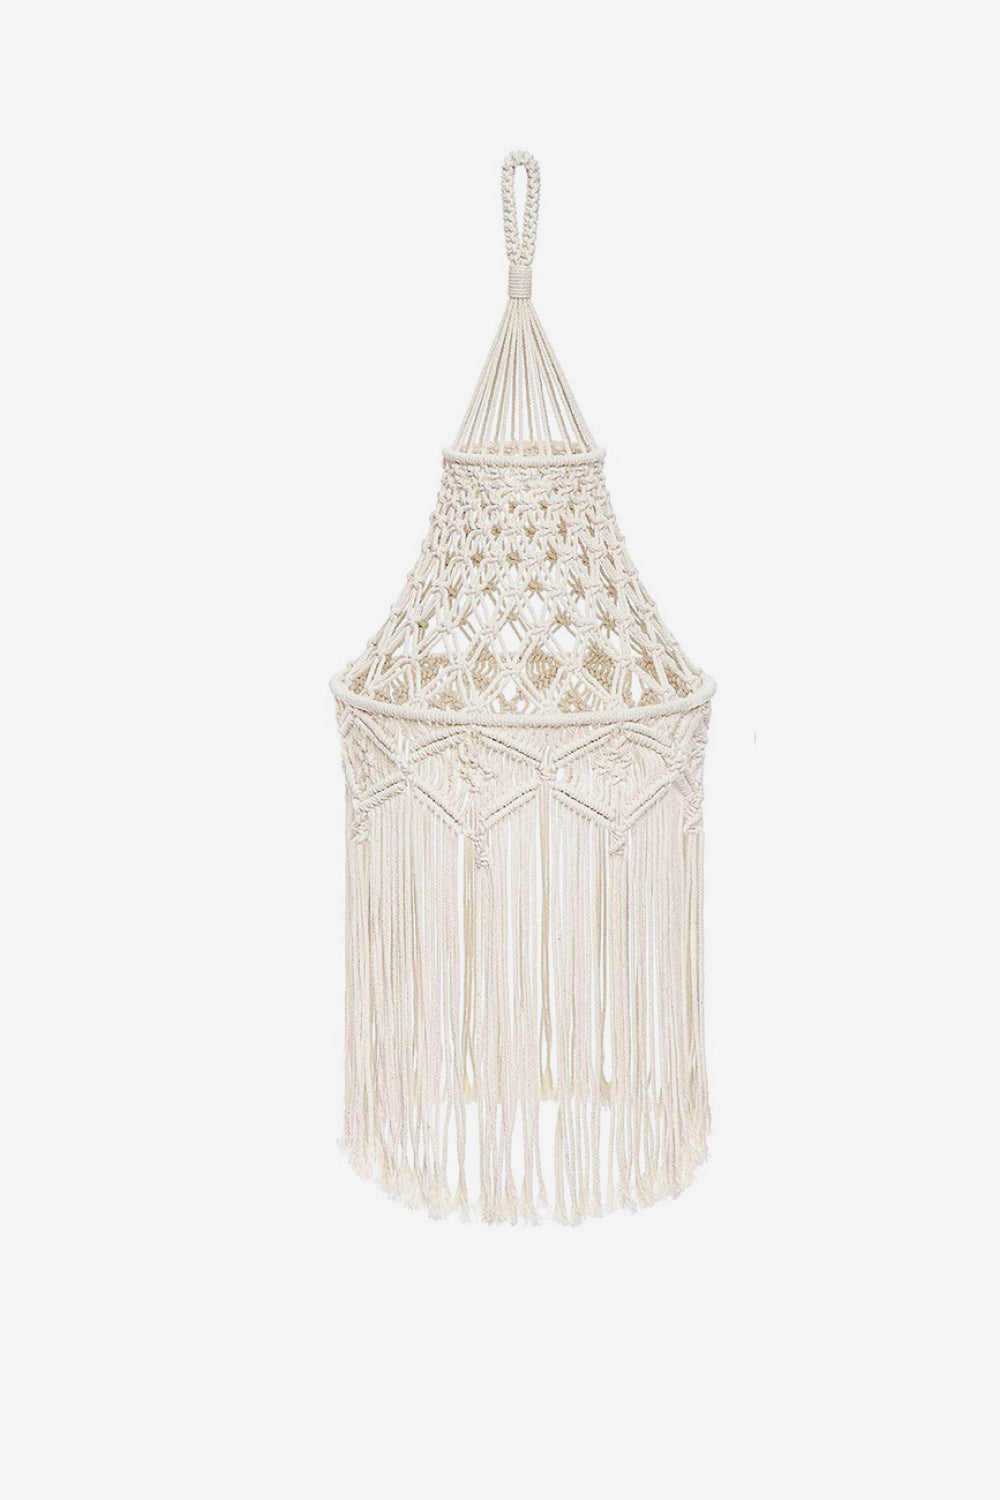 Macrame Hanging Lampshade Print on any thing USA/STOD clothes